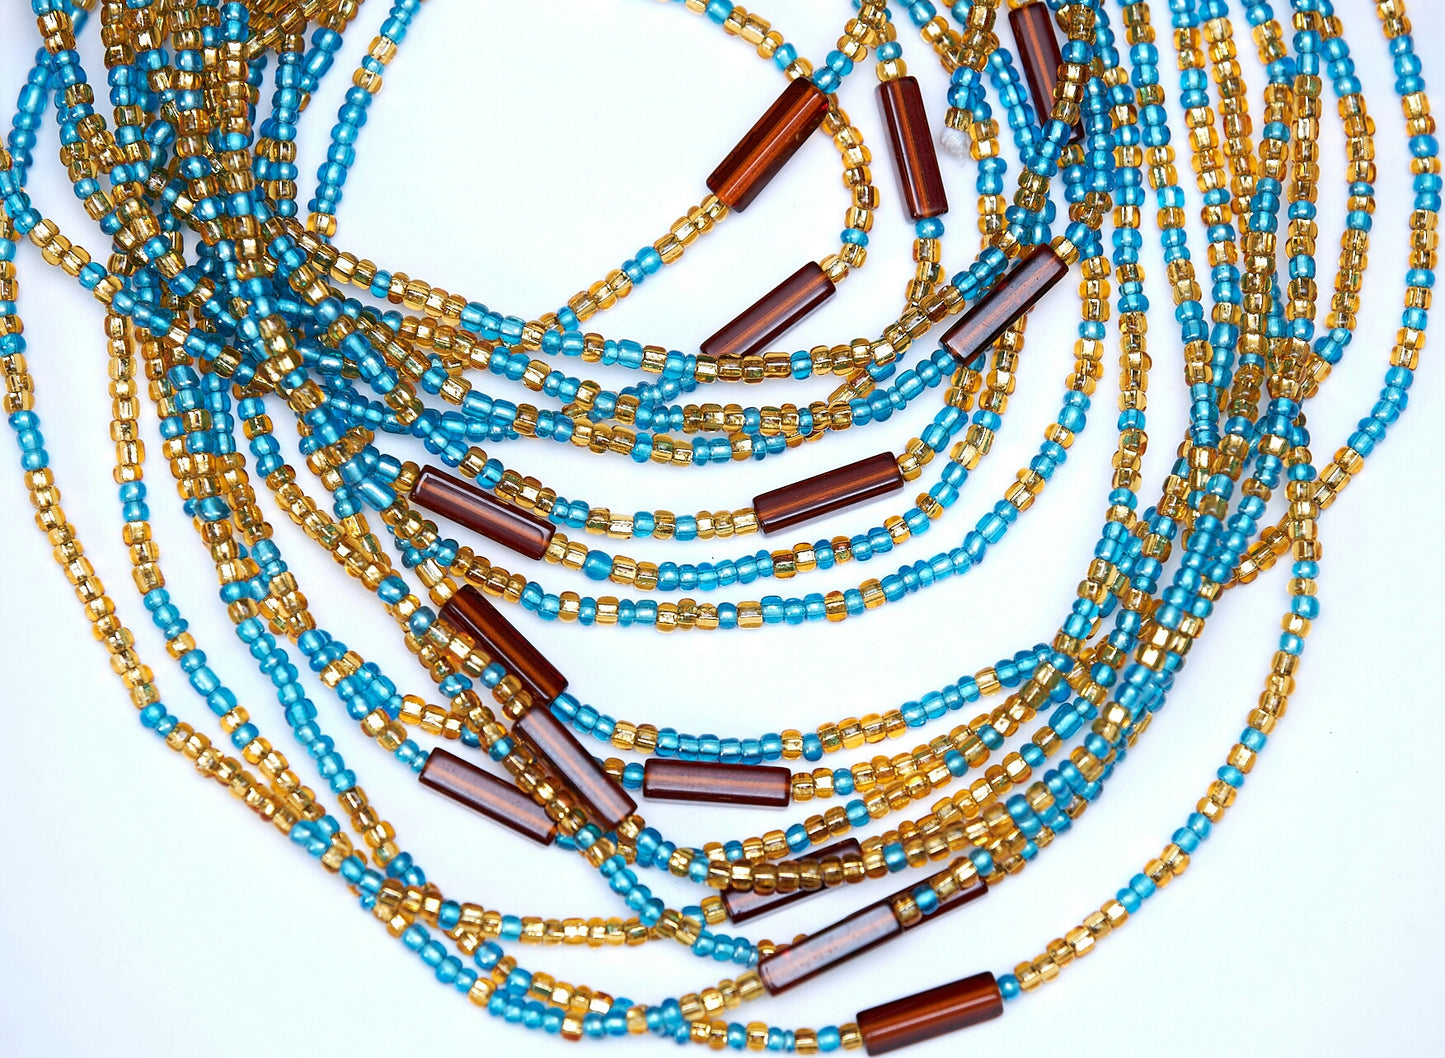 46 Inches Gold And Sea Blue Glass Beads With Brown Pebble Bars Tie On Waist Beads